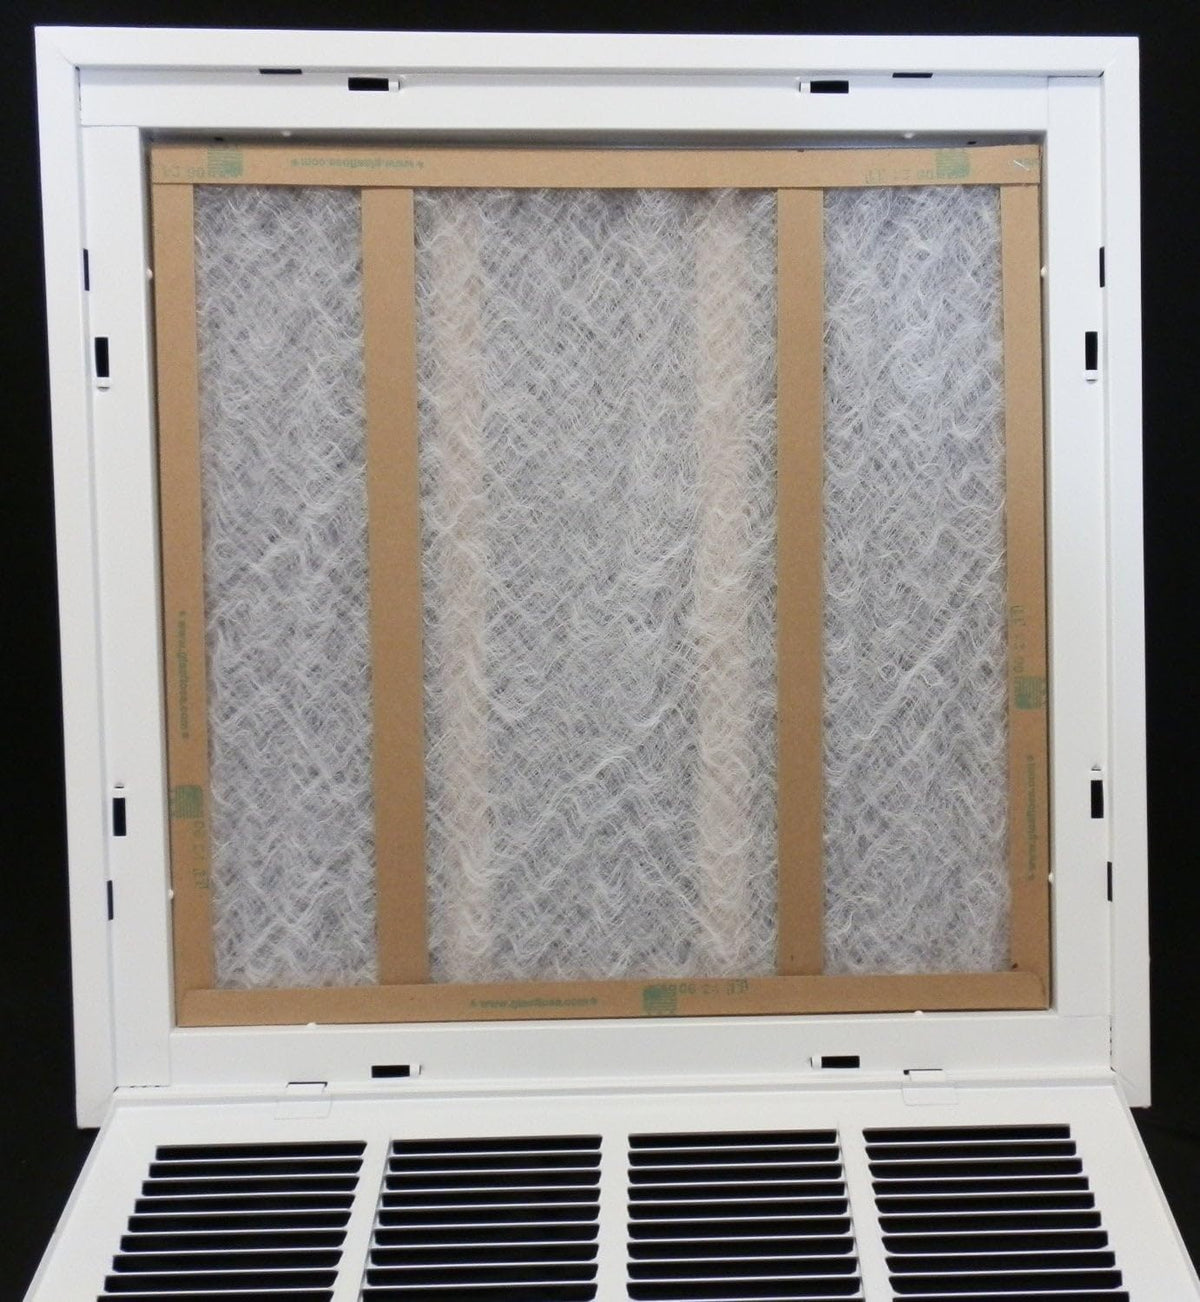 28&quot; X 34&quot; Steel Return Air Filter Grille for 1&quot; Filter - Removable Frame - [Outer Dimensions: 30 5/8&quot; X 36 5/8&quot;]